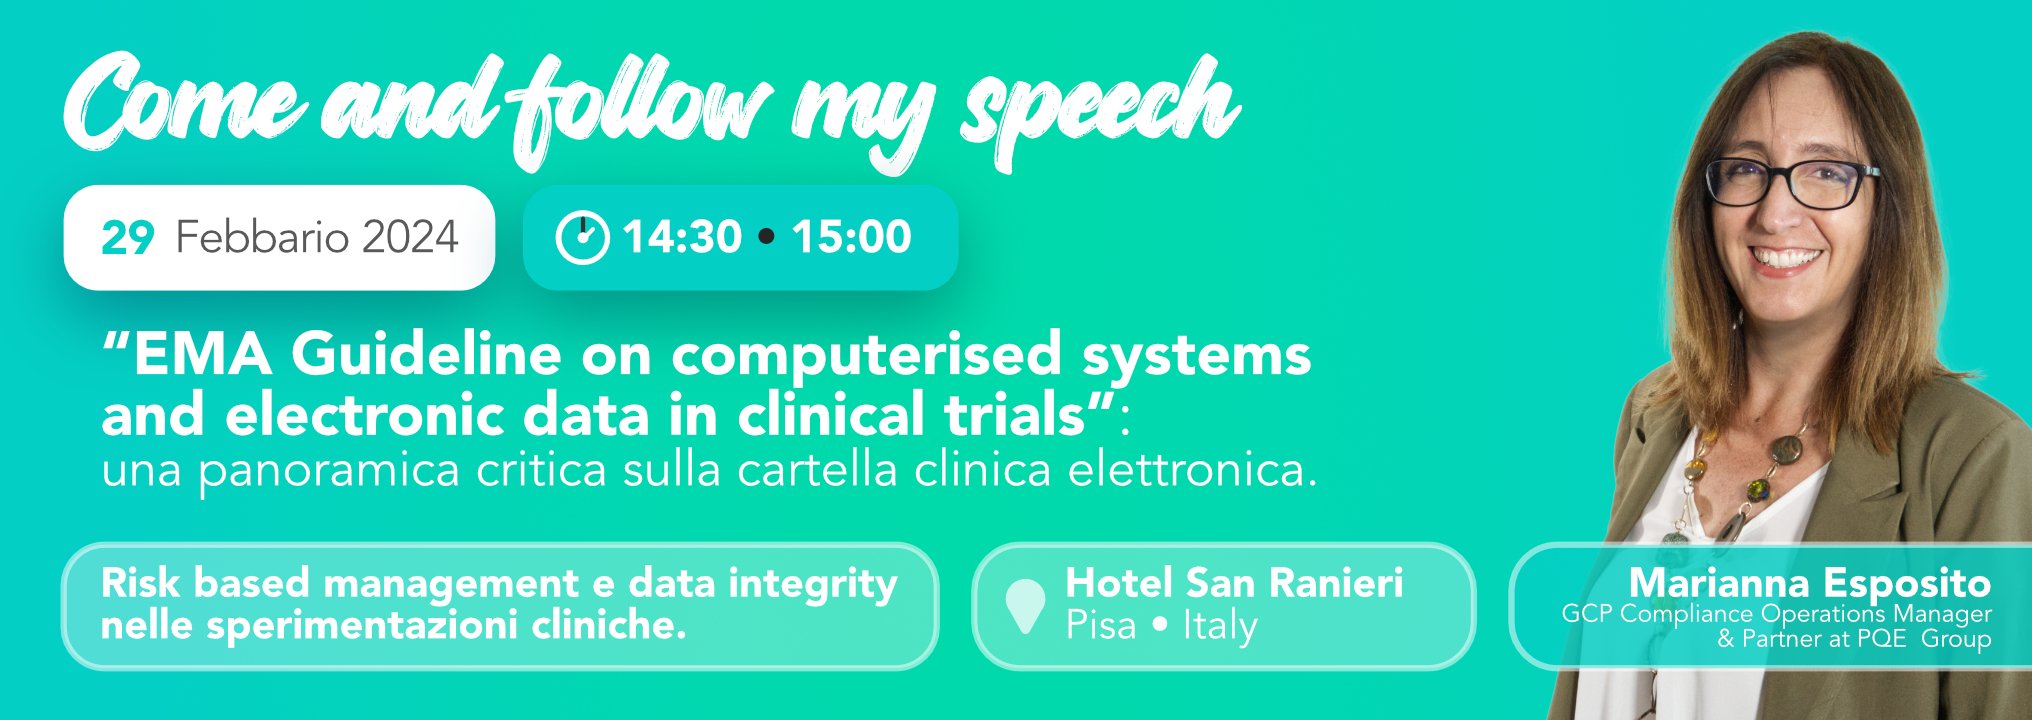 Come and follow Marianna Esposito's speach this February 29th at 14:30 at the Hotel San Ranieri, Pisa Italy